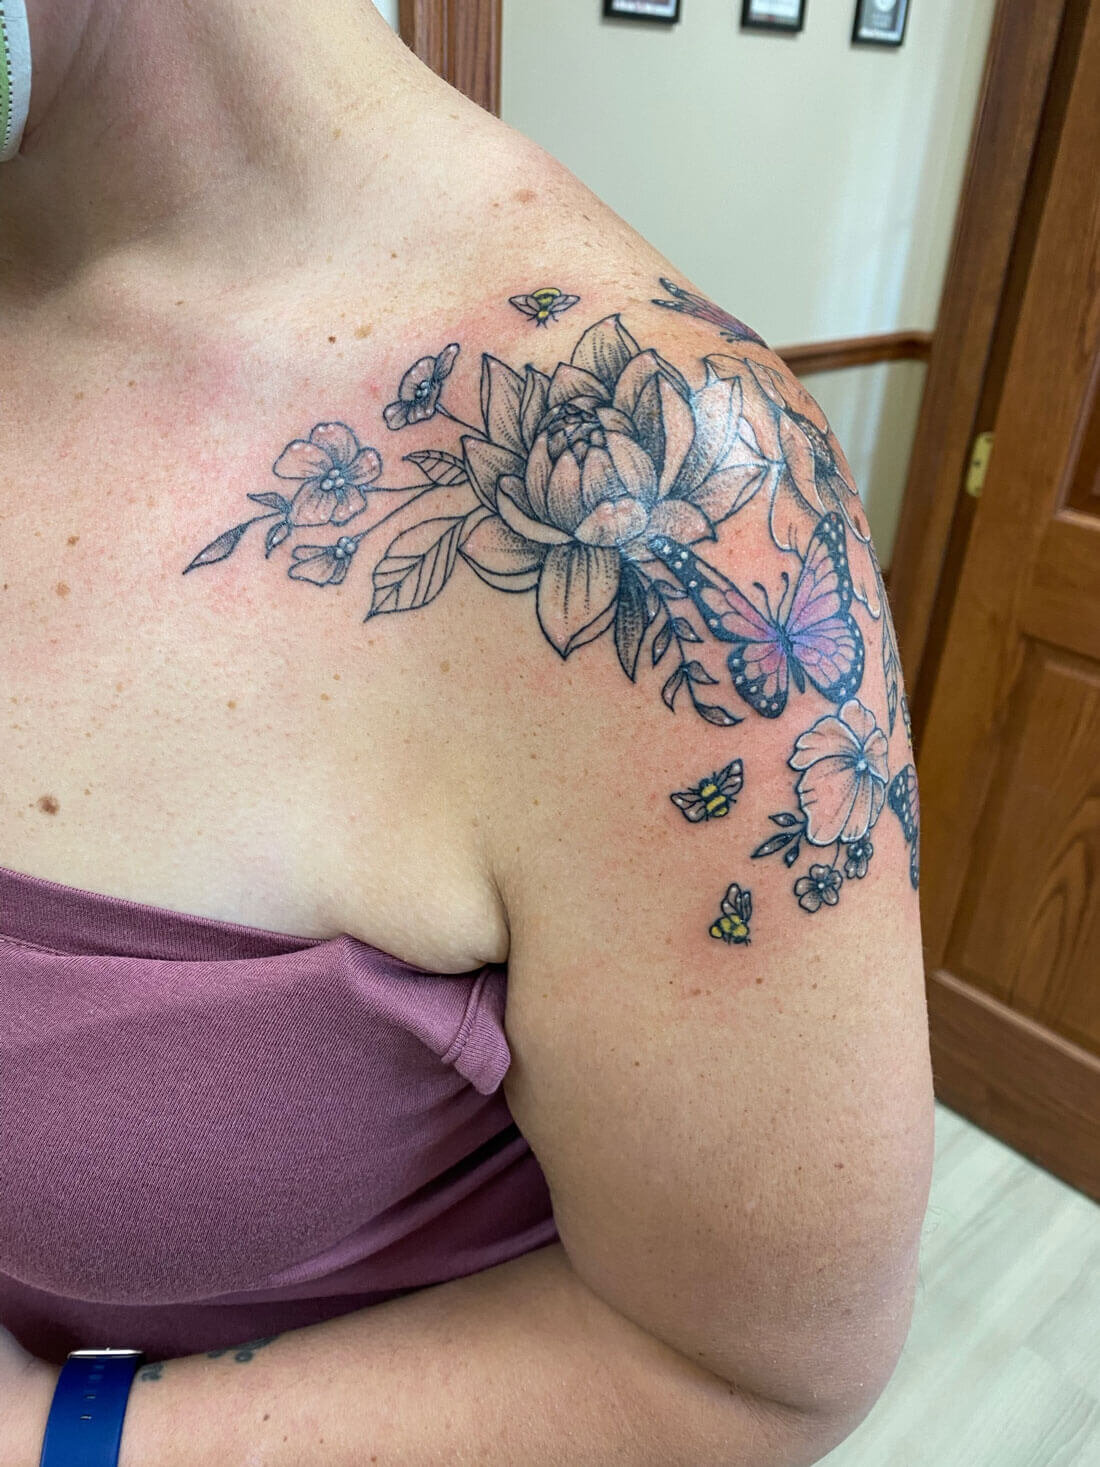 Single LineMinimalist Tattoo artist recommendations in BuffaloRochester  or surrounding area Picture shows some examples TIA  rBuffalo